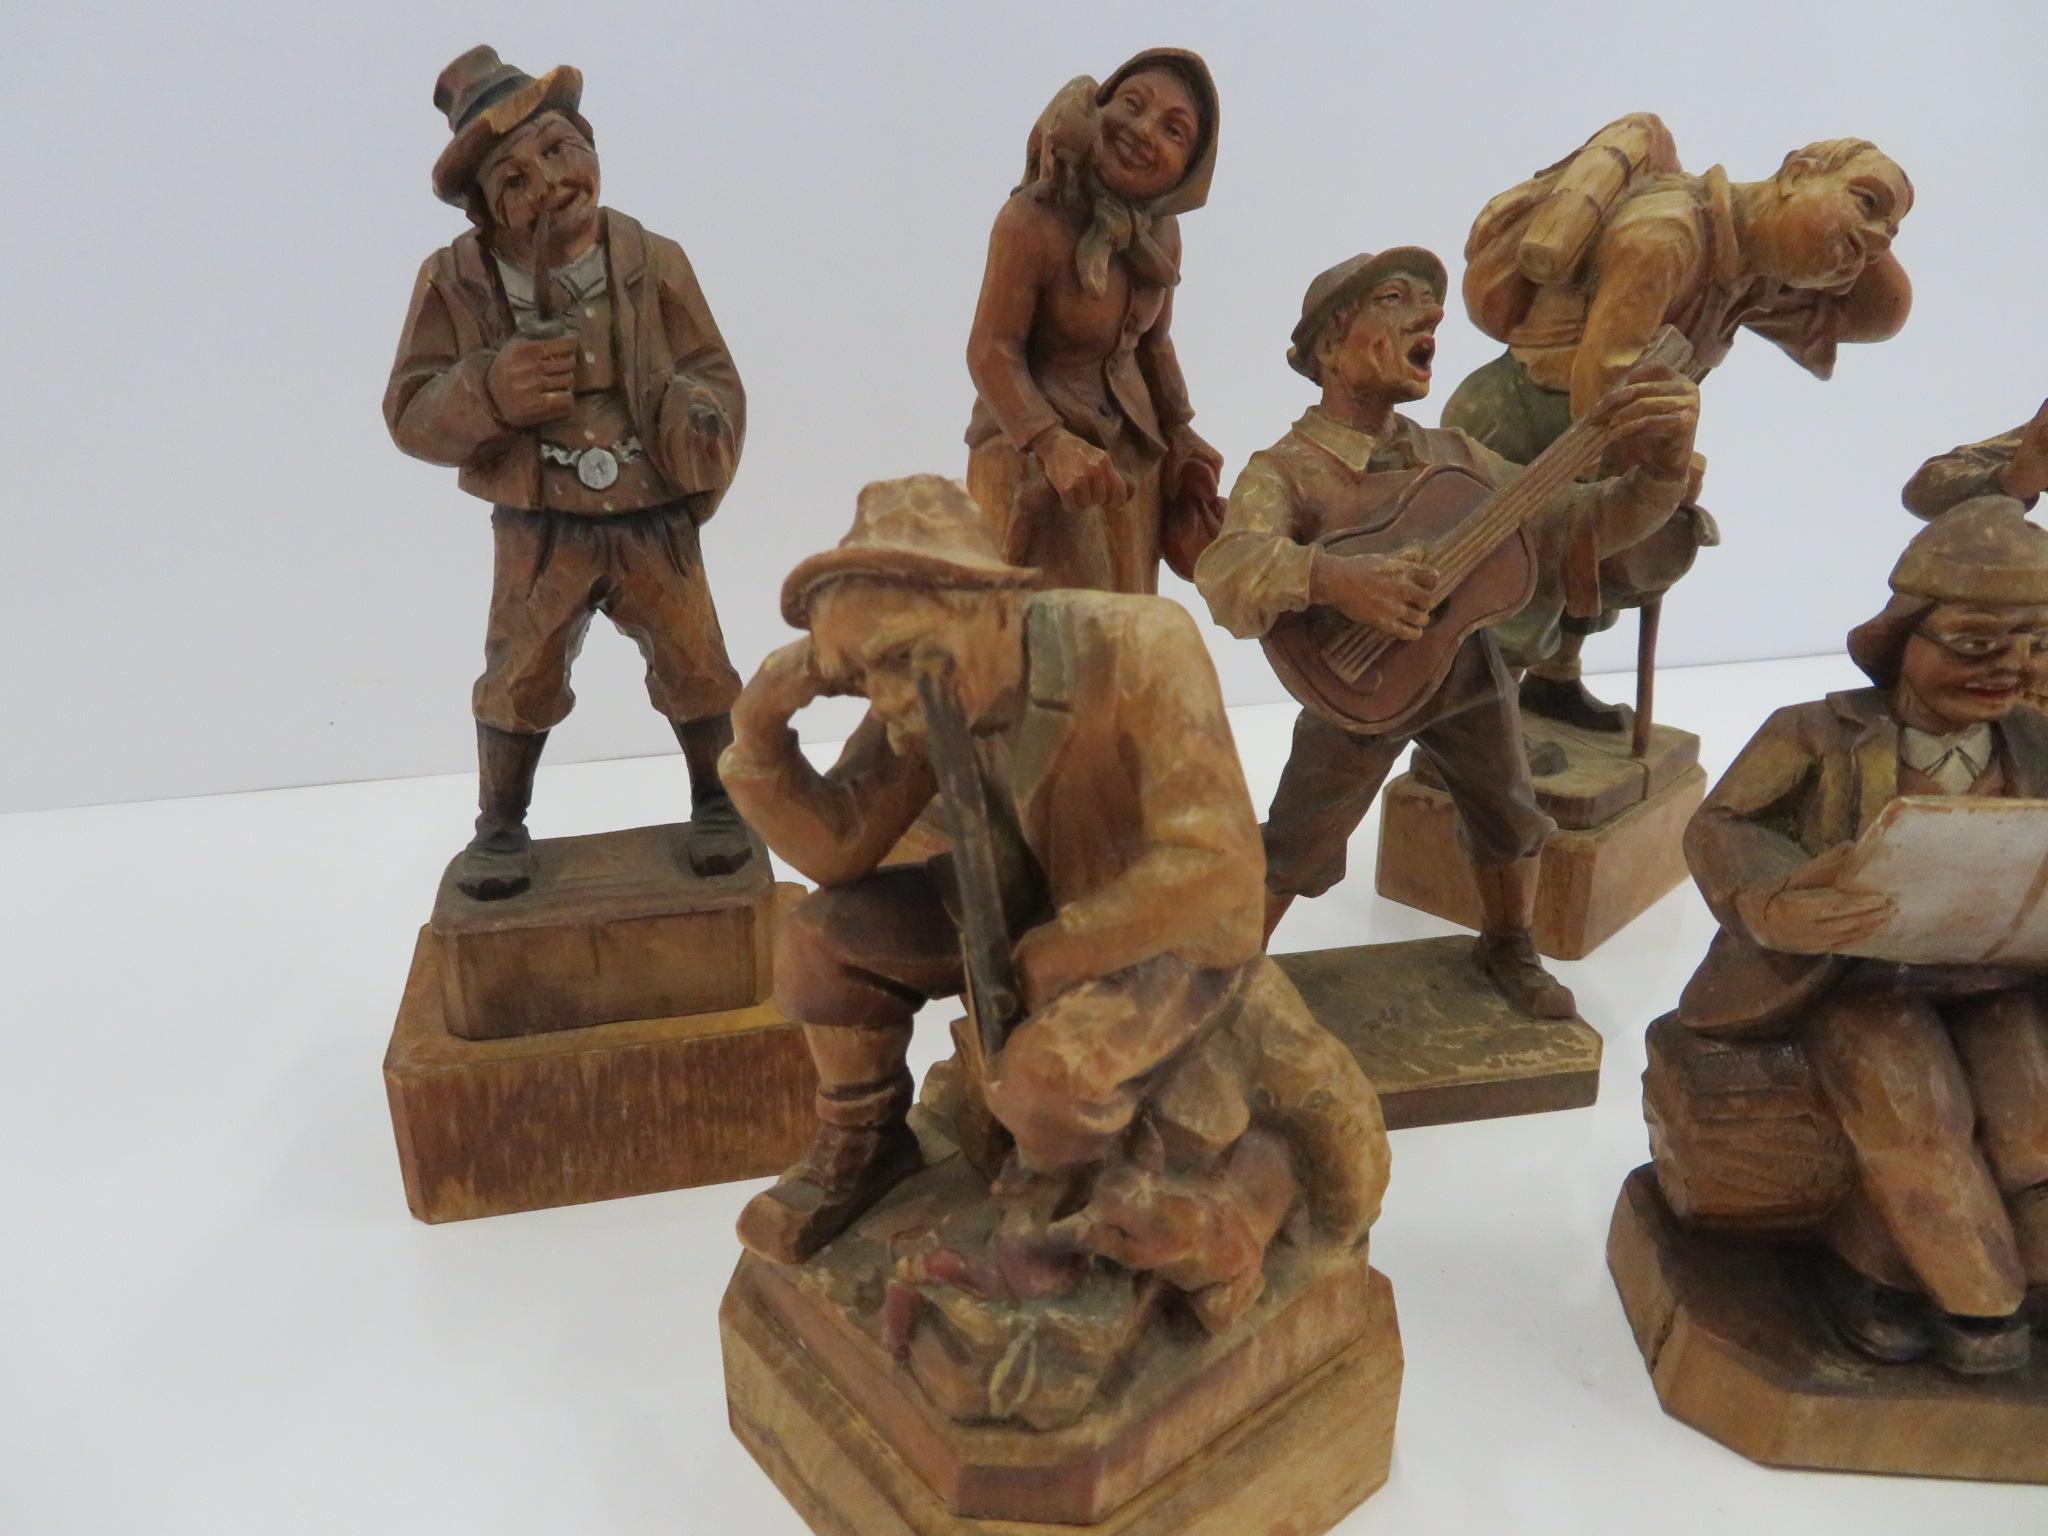 Wonderful collection of seven Anri and Black Forest deftly hand-carved and hand-painted Folk Art figures all in olden times native dress featuring an old lady with a cat on her shoulder, a hiker wiping sweat from his neck, a seated couple reading a